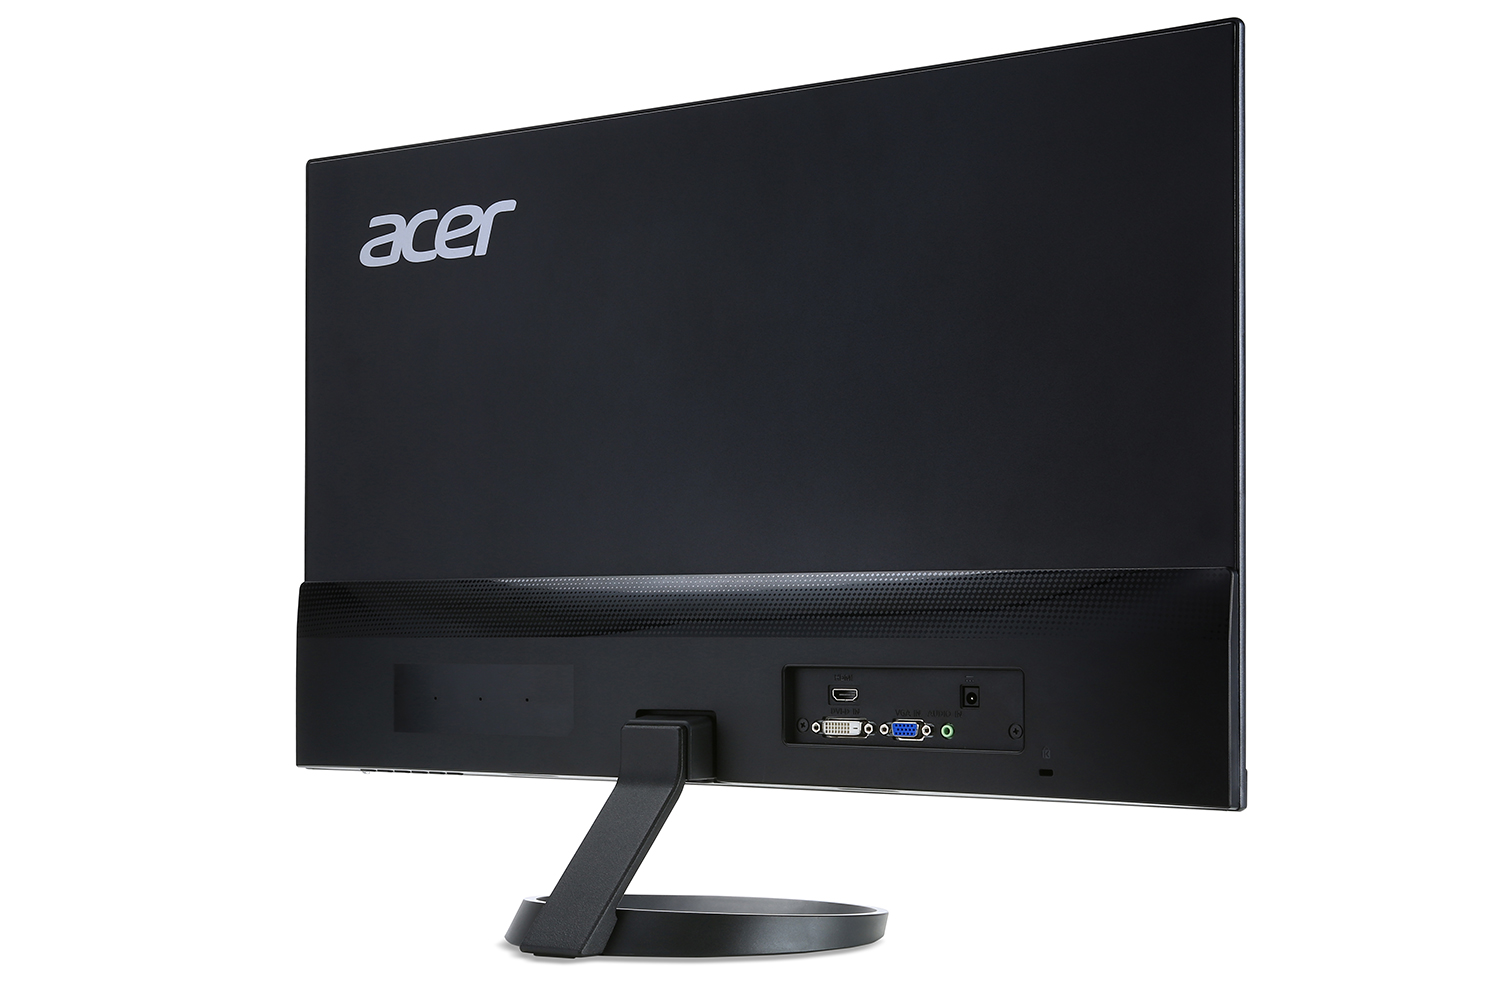 acer computing announce ces 2016 r271h rear right facing